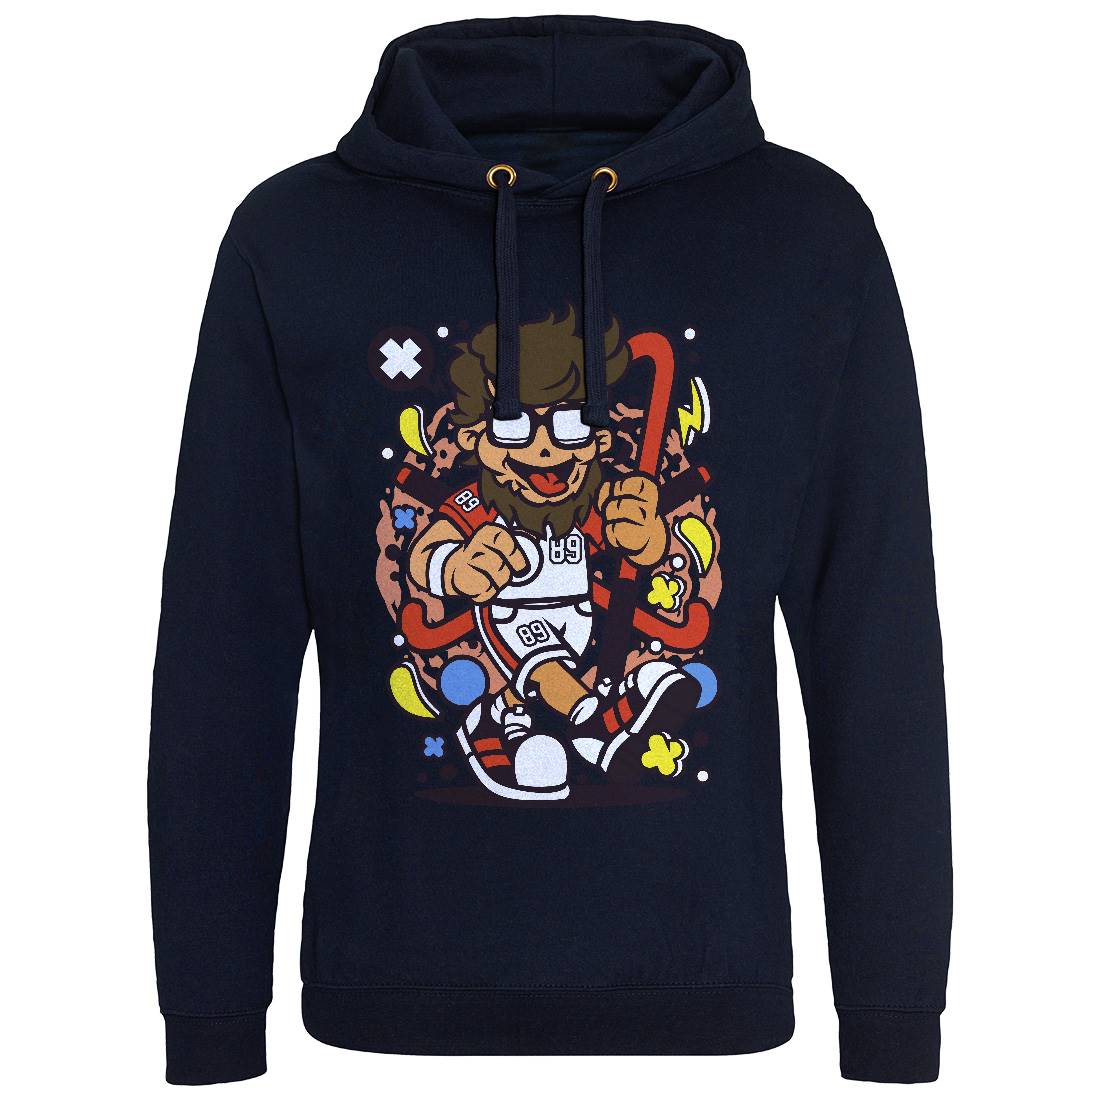 Hipster Field Hockey Mens Hoodie Without Pocket Sport C559